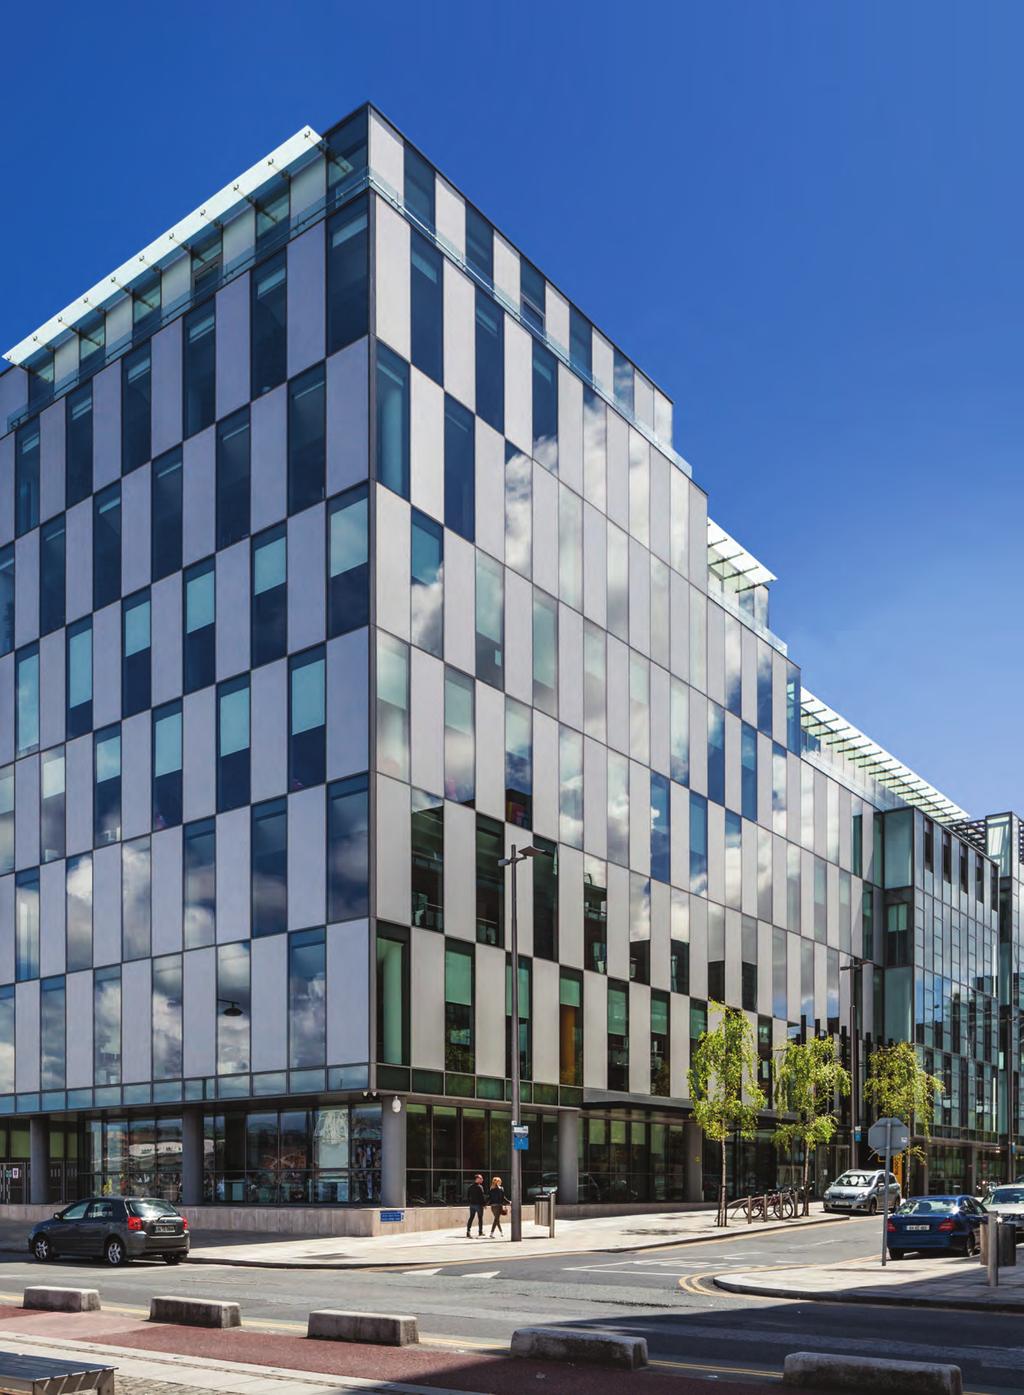 FULLY FITTED OFFICES TO LET BY ASSIGNMENT Floors 3+4 The Bloodstone Building Sir John Rogerson s Quay, Dublin 2 Fully fitted and